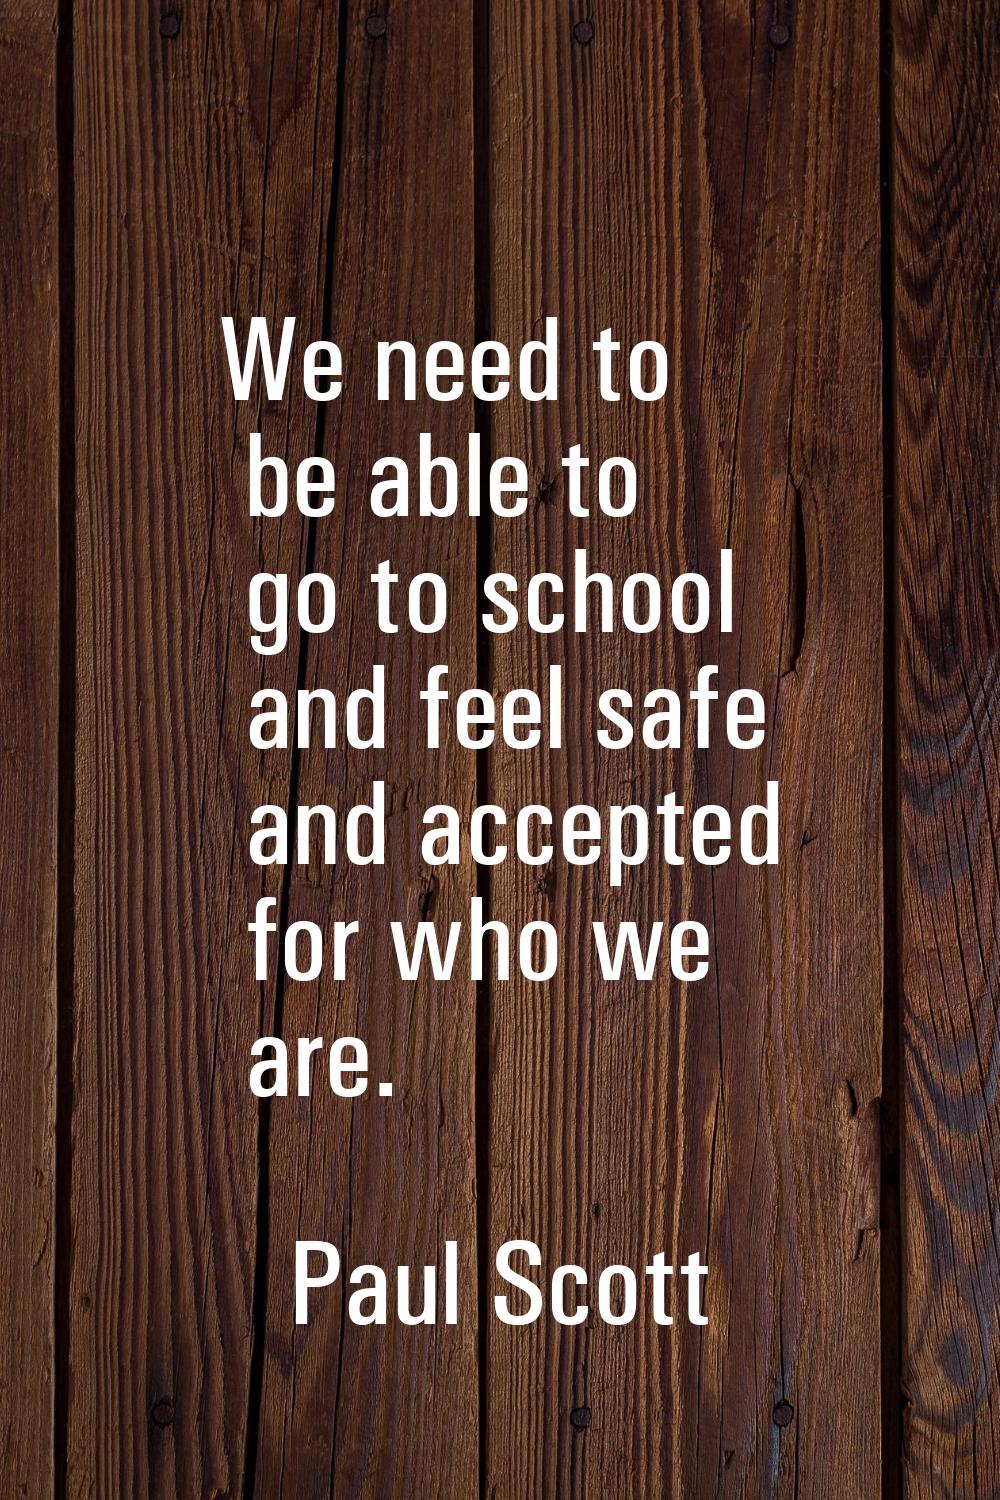 We need to be able to go to school and feel safe and accepted for who we are.